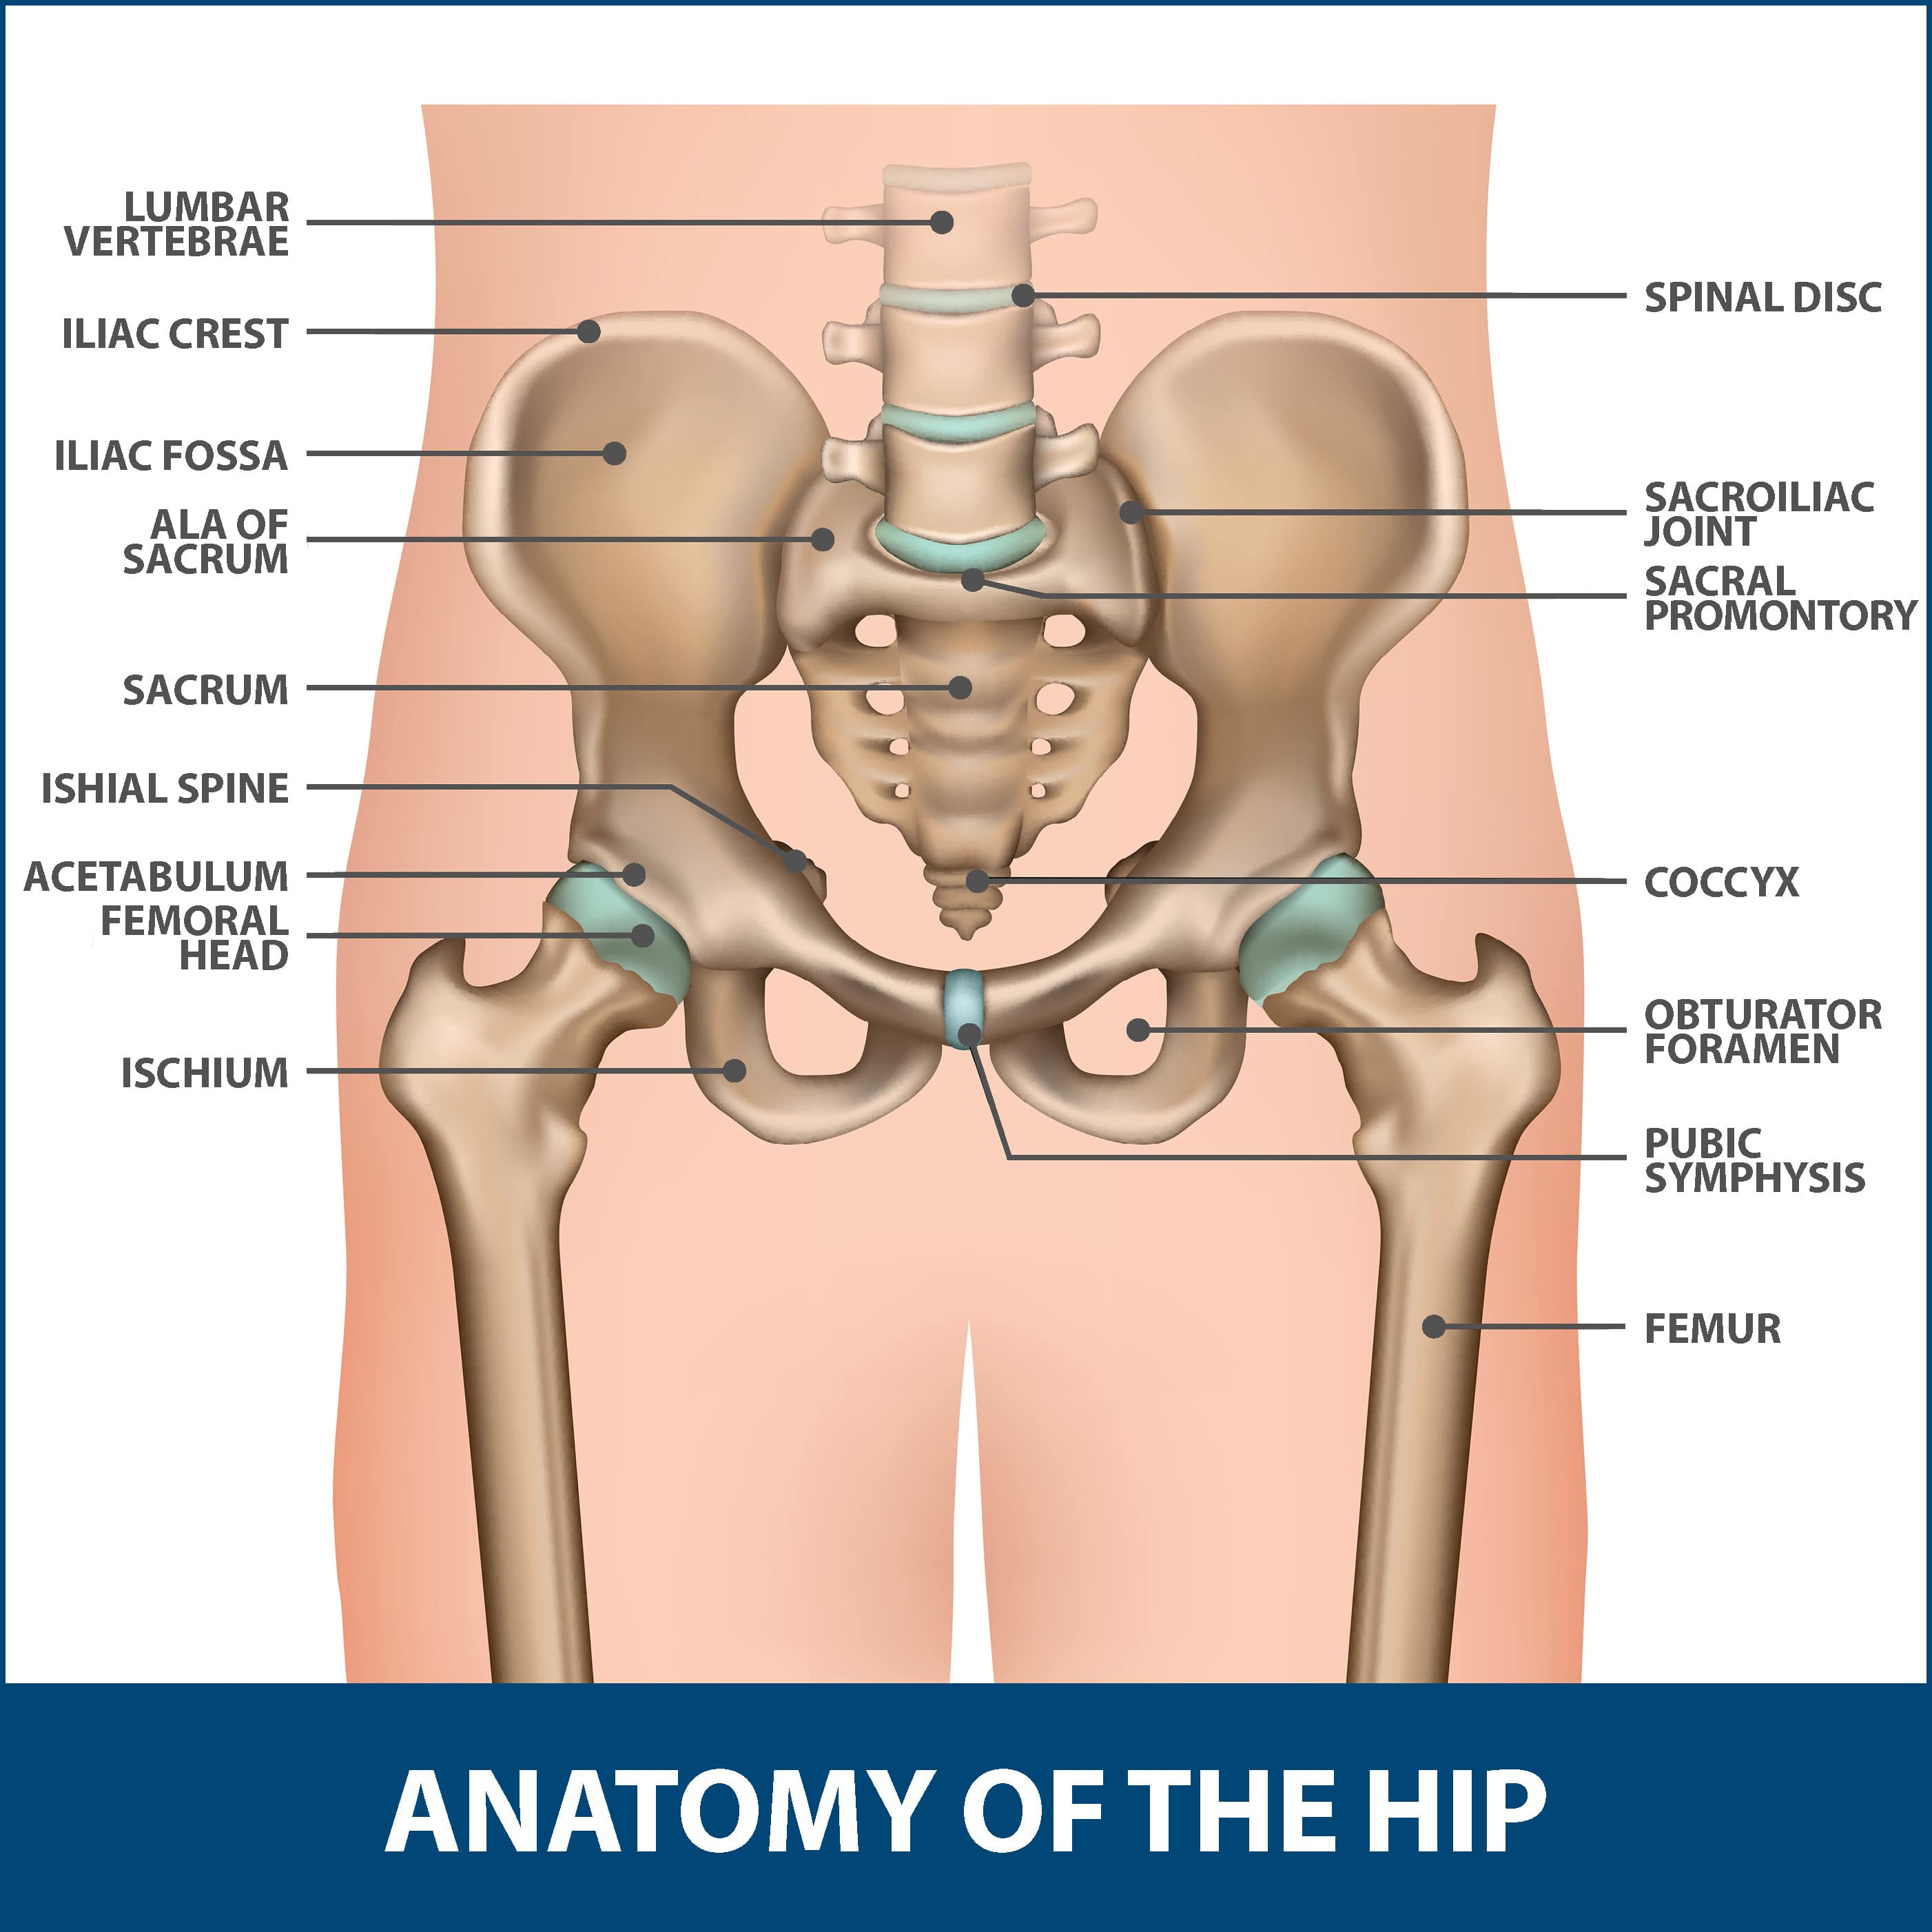 hip fracture types